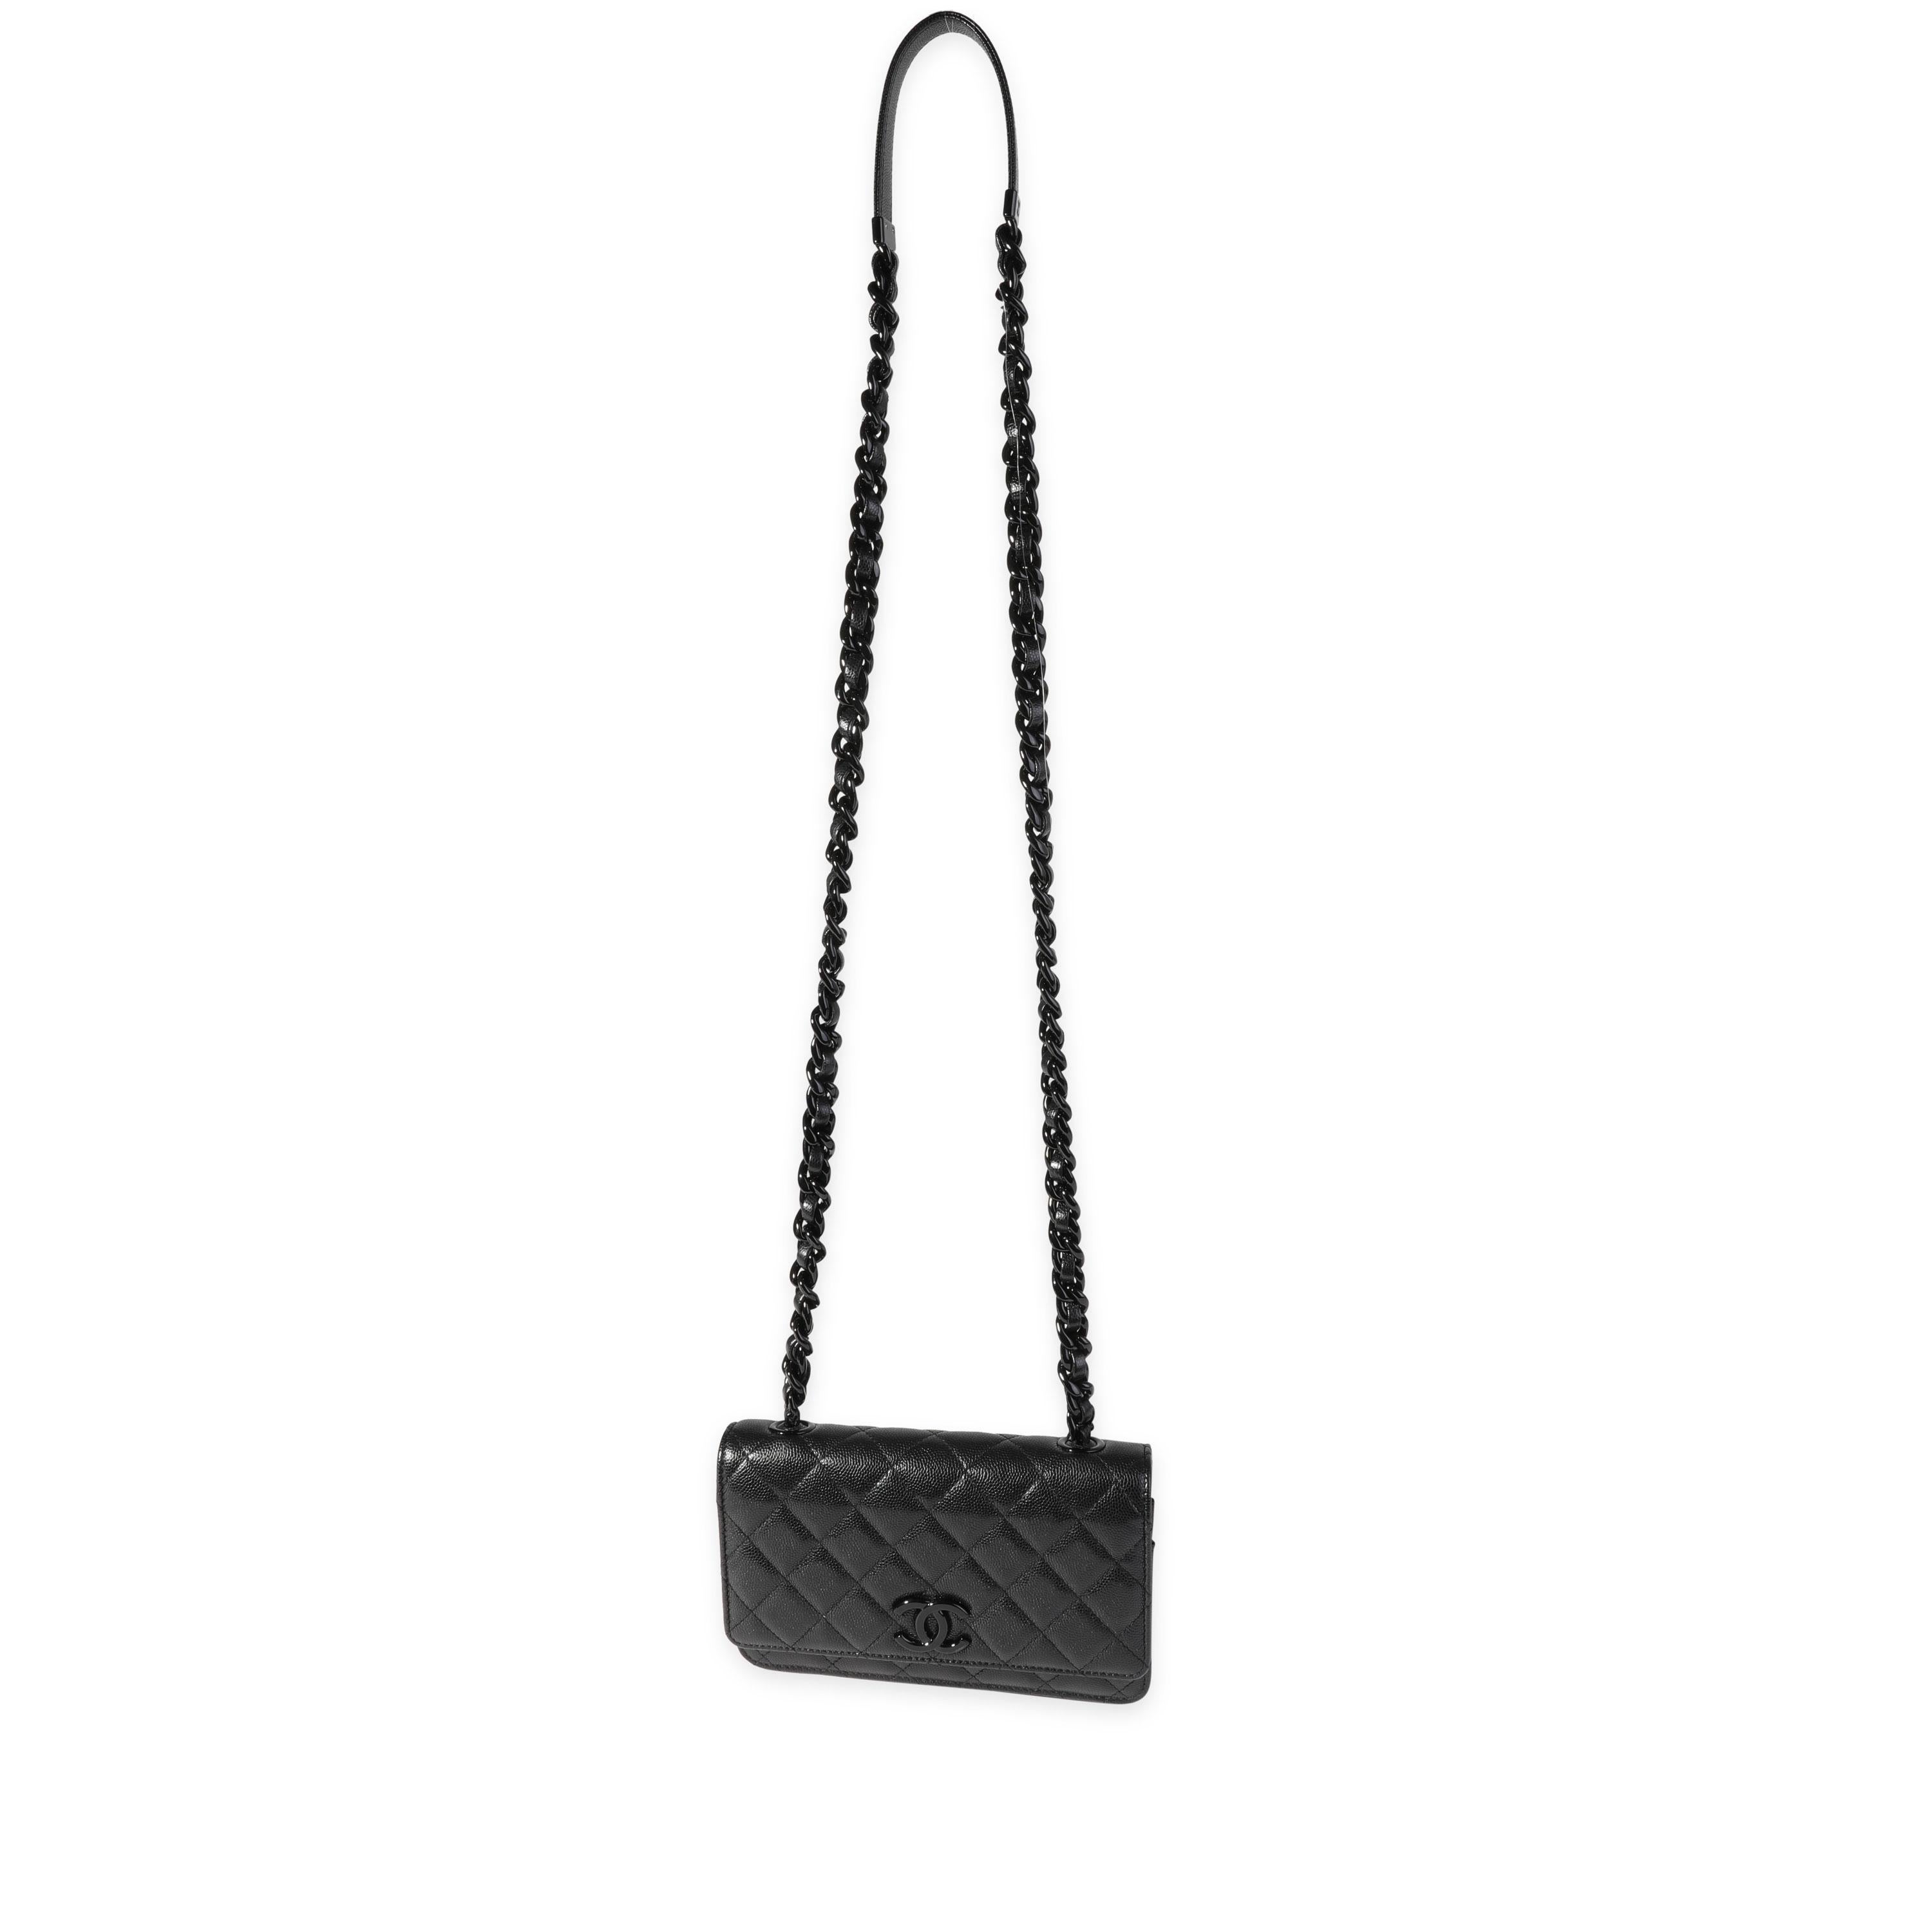 Listing Title: Chanel So Black Caviar My Everything Chain Wallet
SKU: 120722
Condition: Pre-owned 
Handbag Condition: Excellent
Condition Comments: Excellent Condition. Scuff to CC hardware. No other visible signs of wear.
Brand: Chanel
Model: My